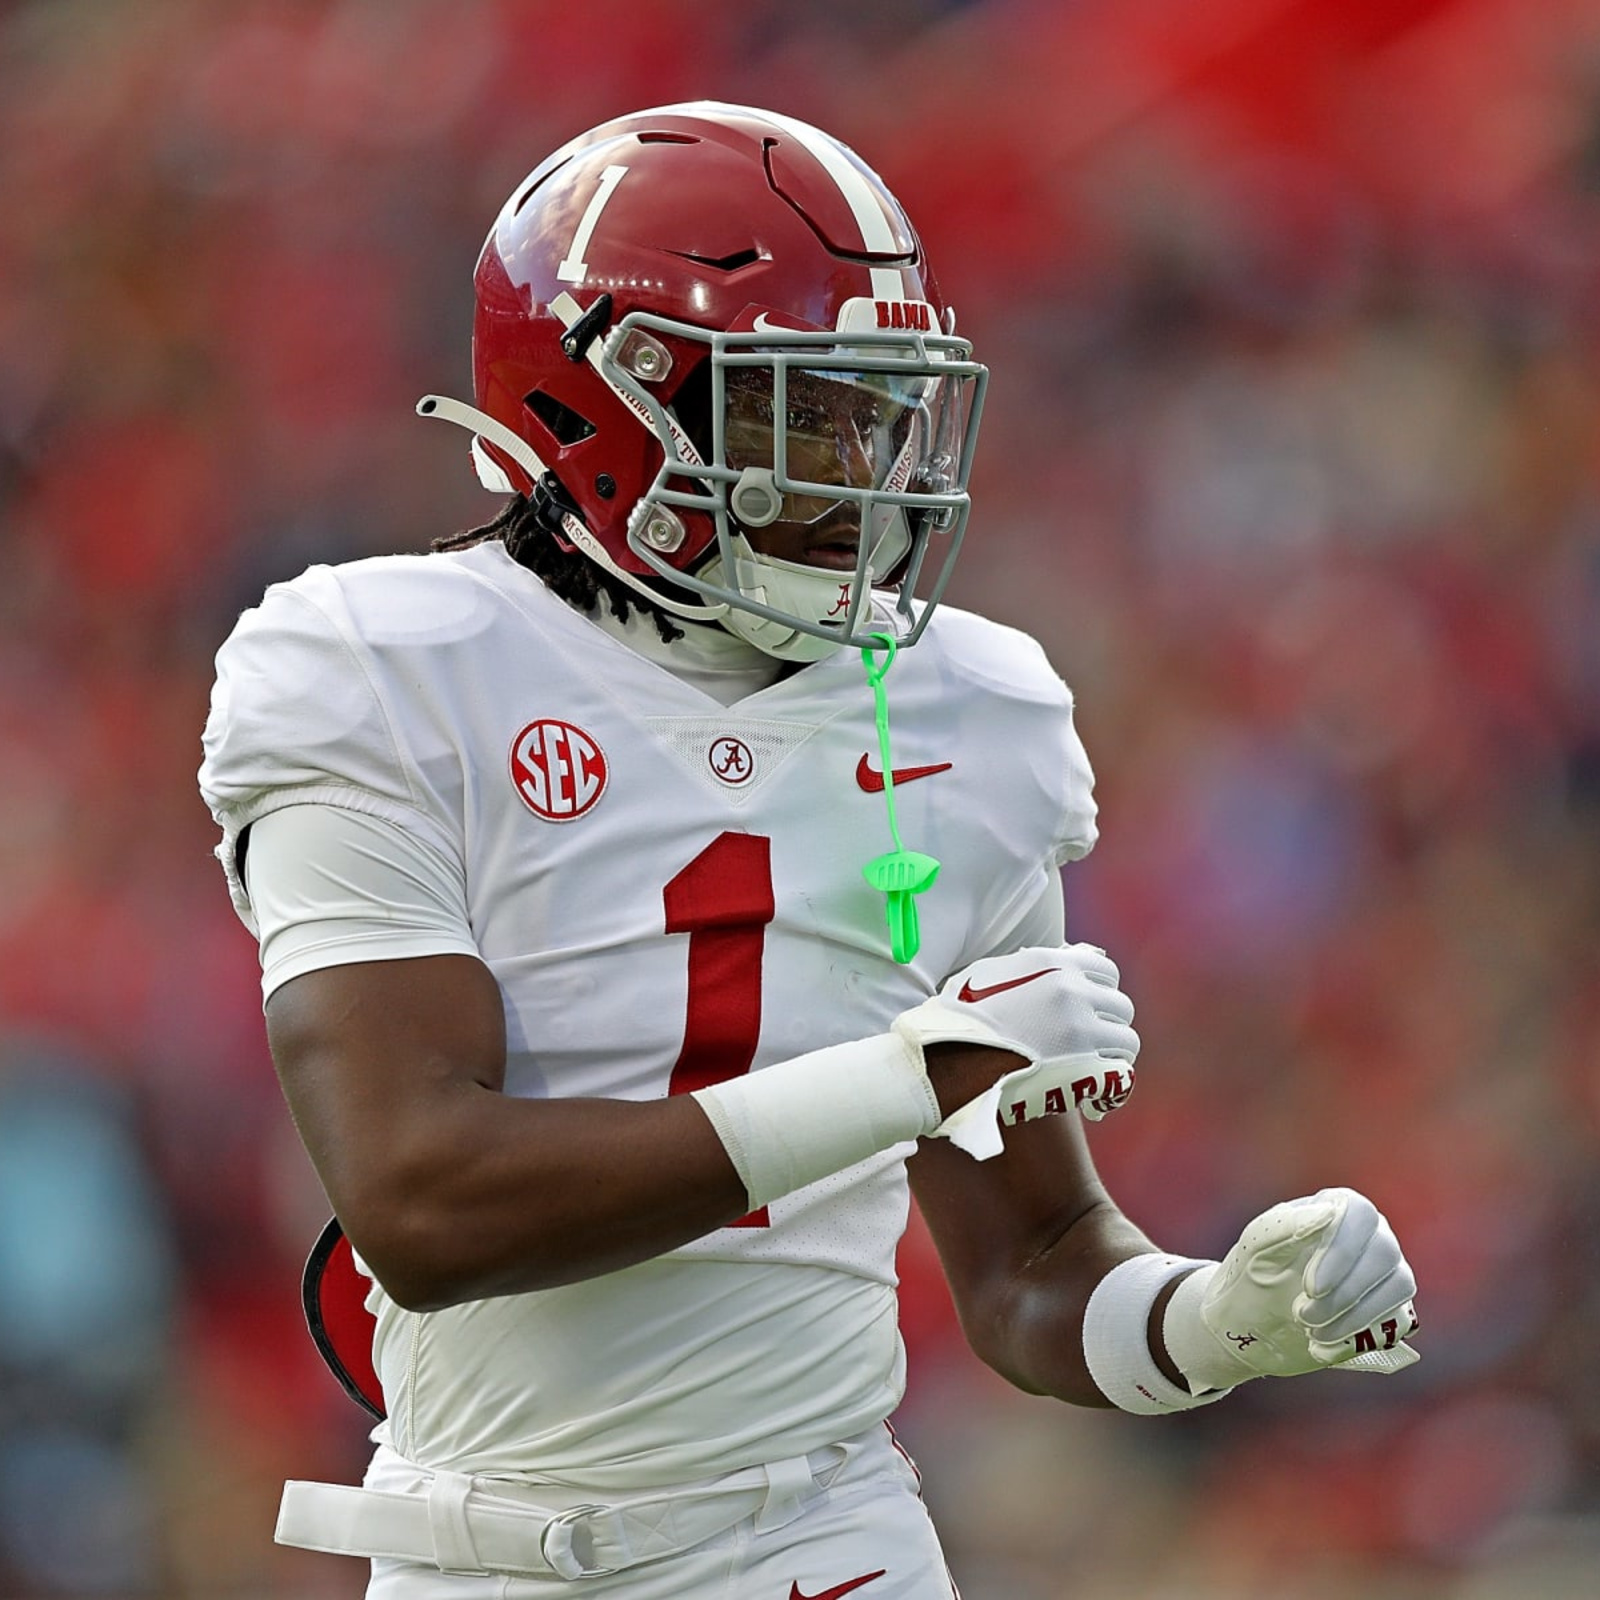 Winners and losers from the first round of the 2022 NFL Draft